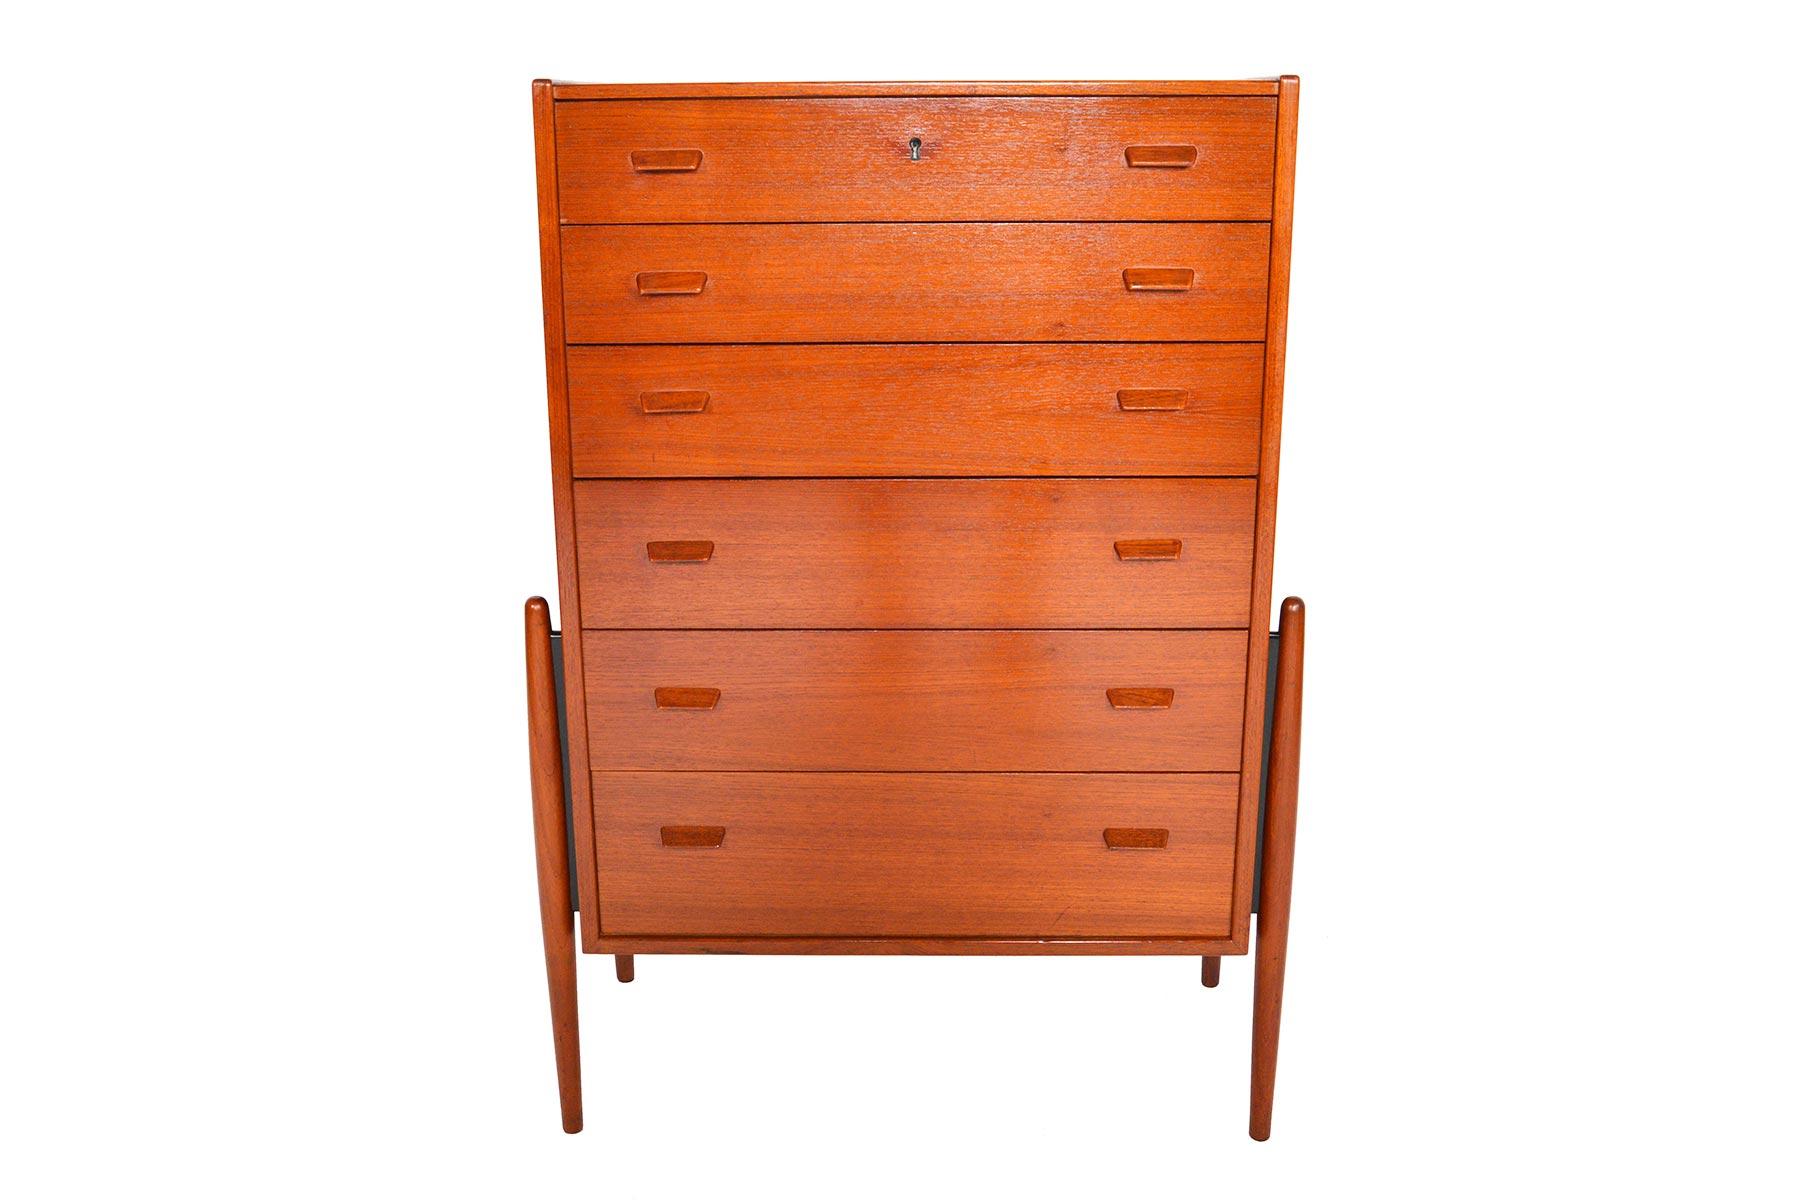 This exceptionally rare Danish modern midcentury teak highboy dresser will make a statement in any modern home. Built like a rocket, this atomic design features four exterior mounted teak spindle legs. Drawers become progressively deeper towards the